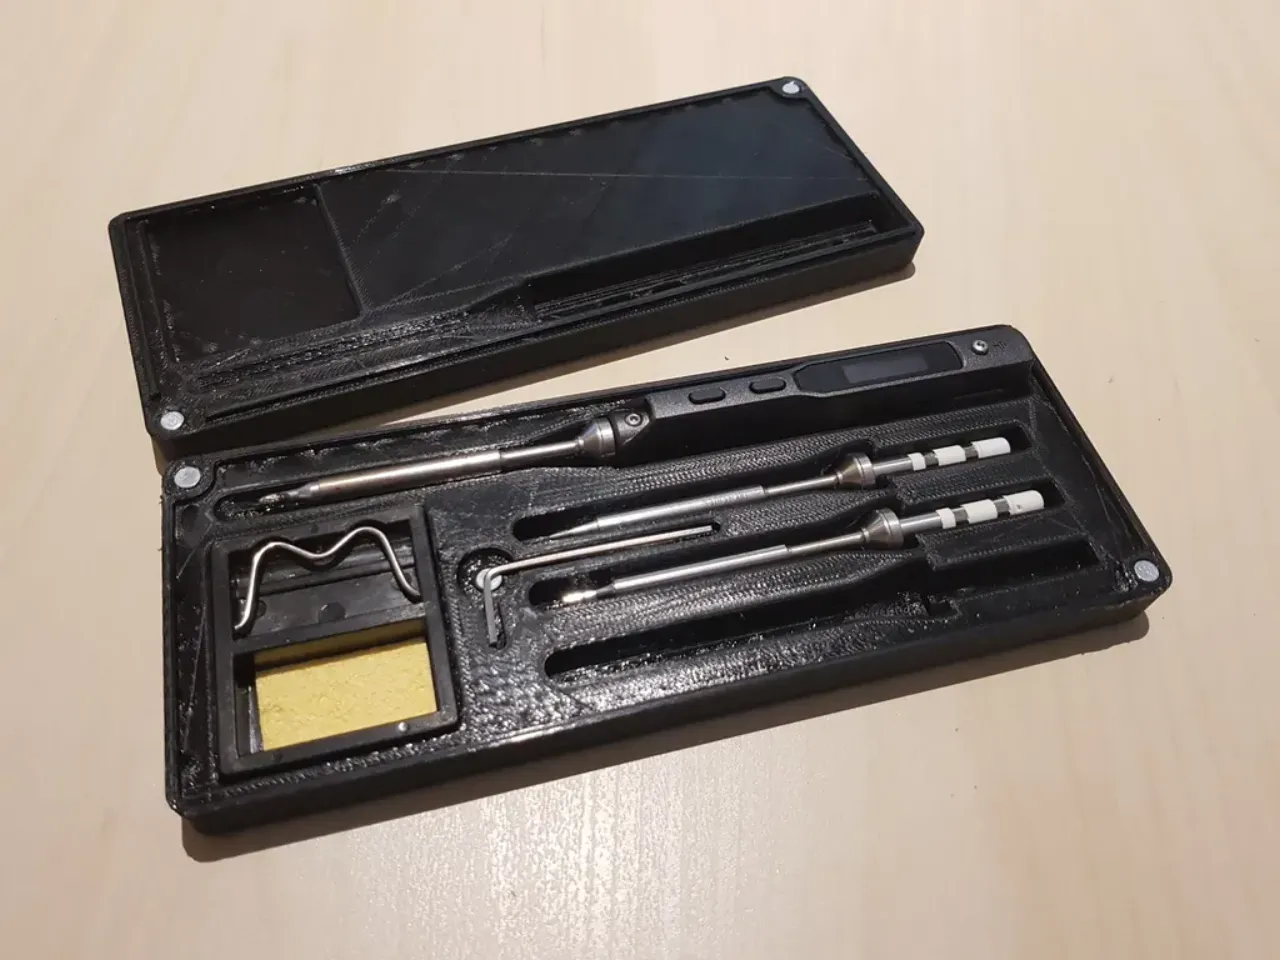 3D Printing New Cases For The TS100 Soldering Iron